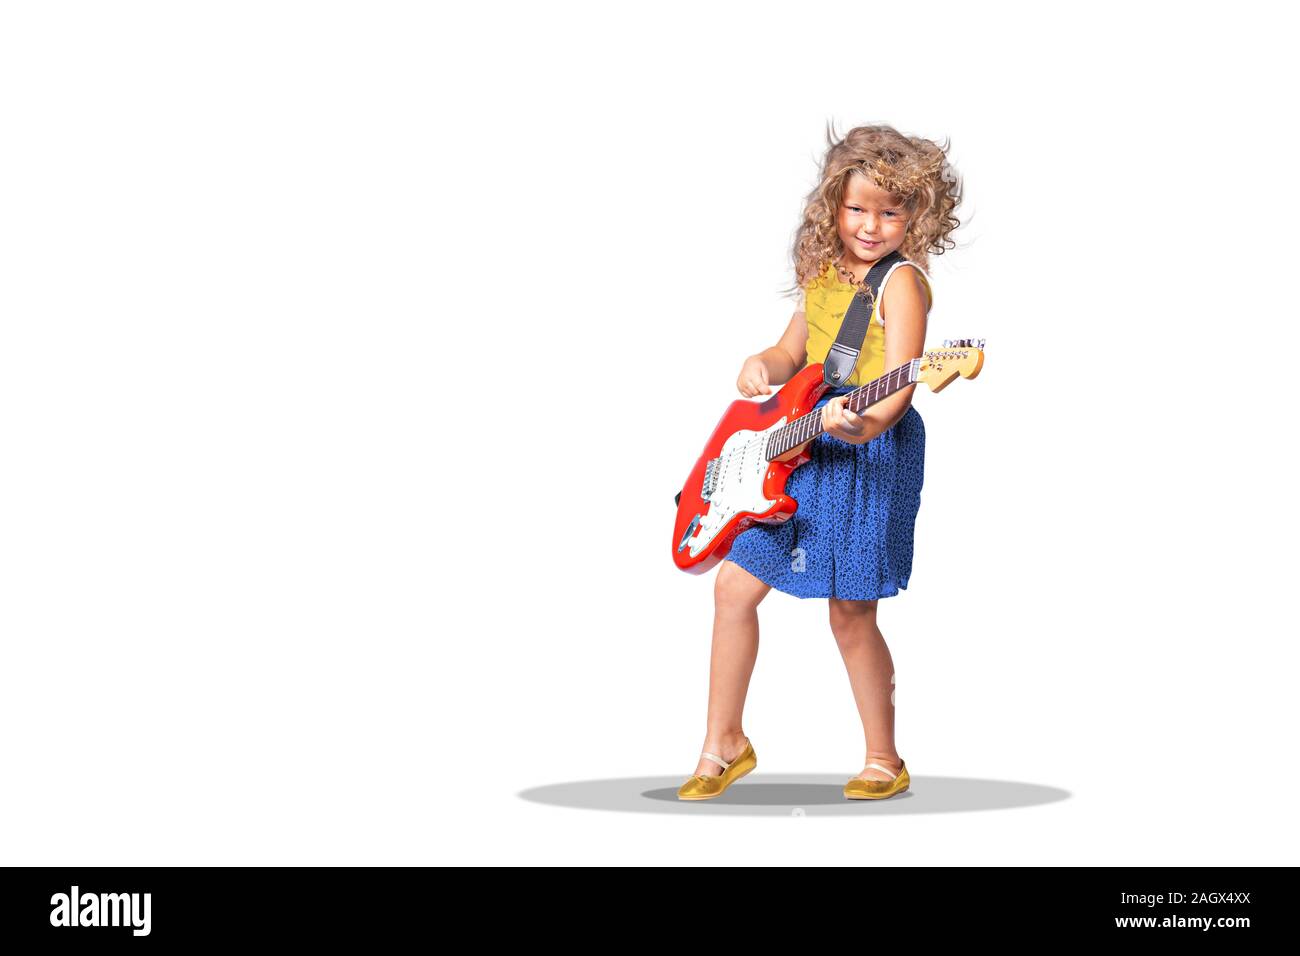 portrait of little girl with a guitar on the stage Stock Photo